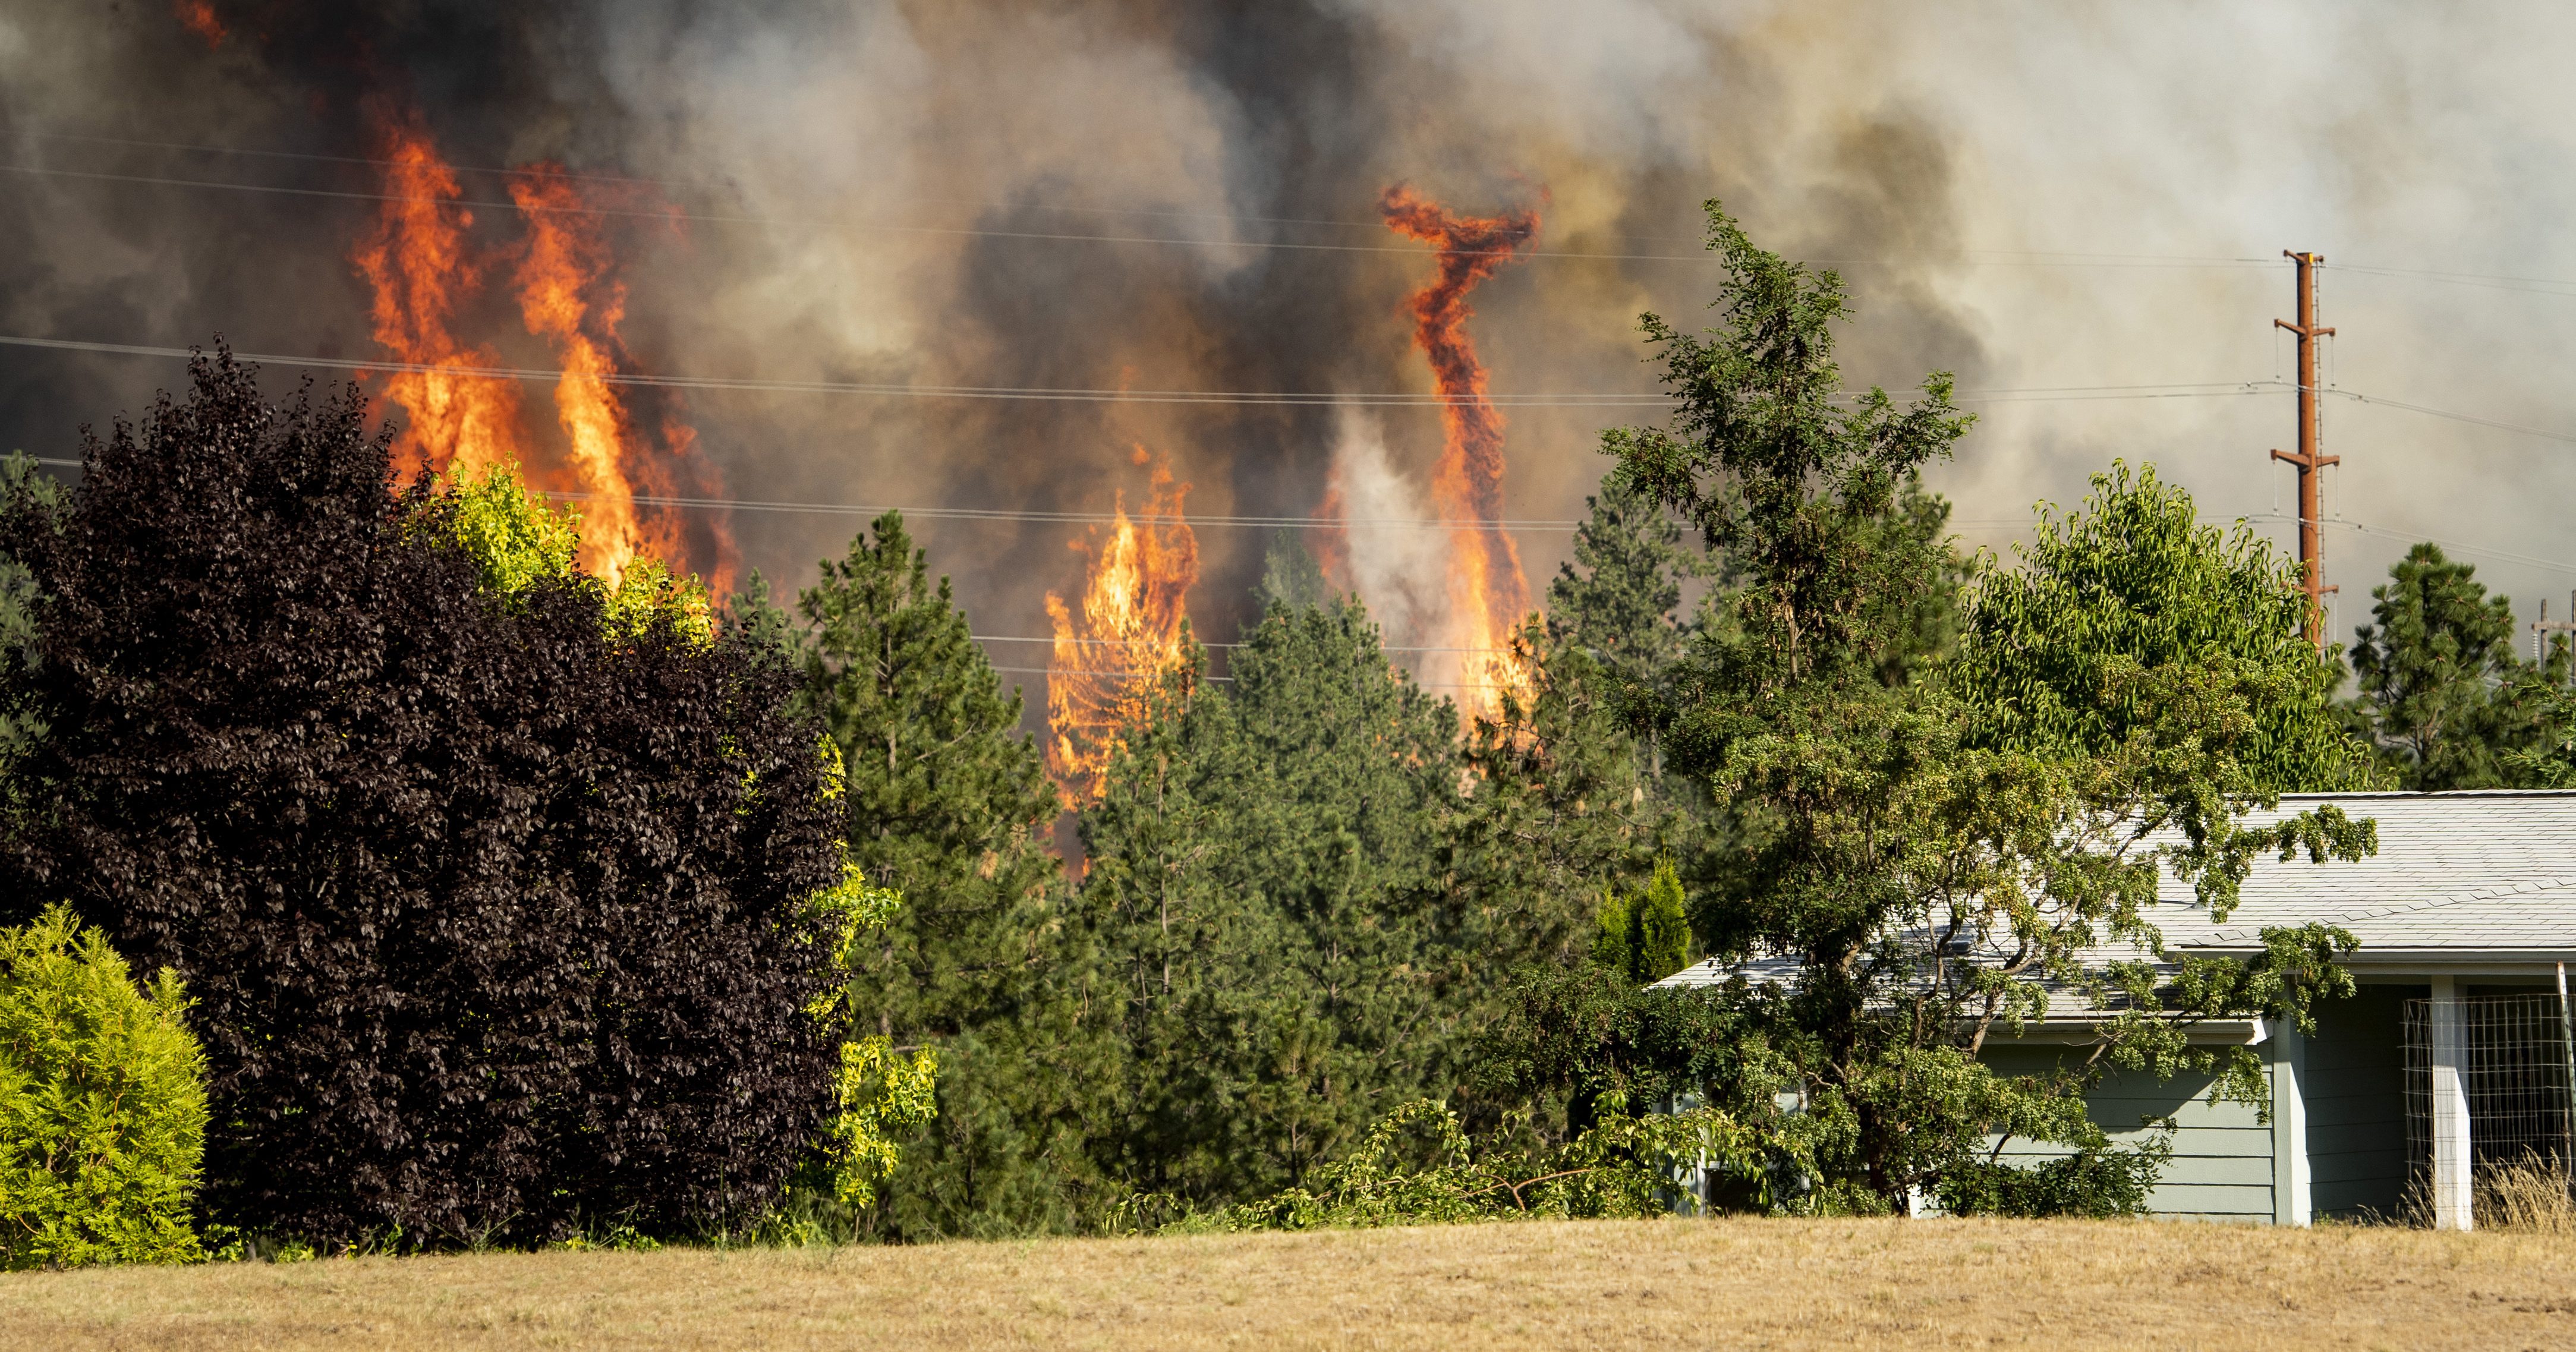 Trees burn near a home Tuesday, July 17, 2018 in Spokane, Wash. Fire crews from Spokane, Spokane Valley and Fire District 9 are fighting a fast-moving wildfire just north of Upriver Drive that has engulfed several homes and prompted fire officials to call for a level three evacuation for homeowners in the area.